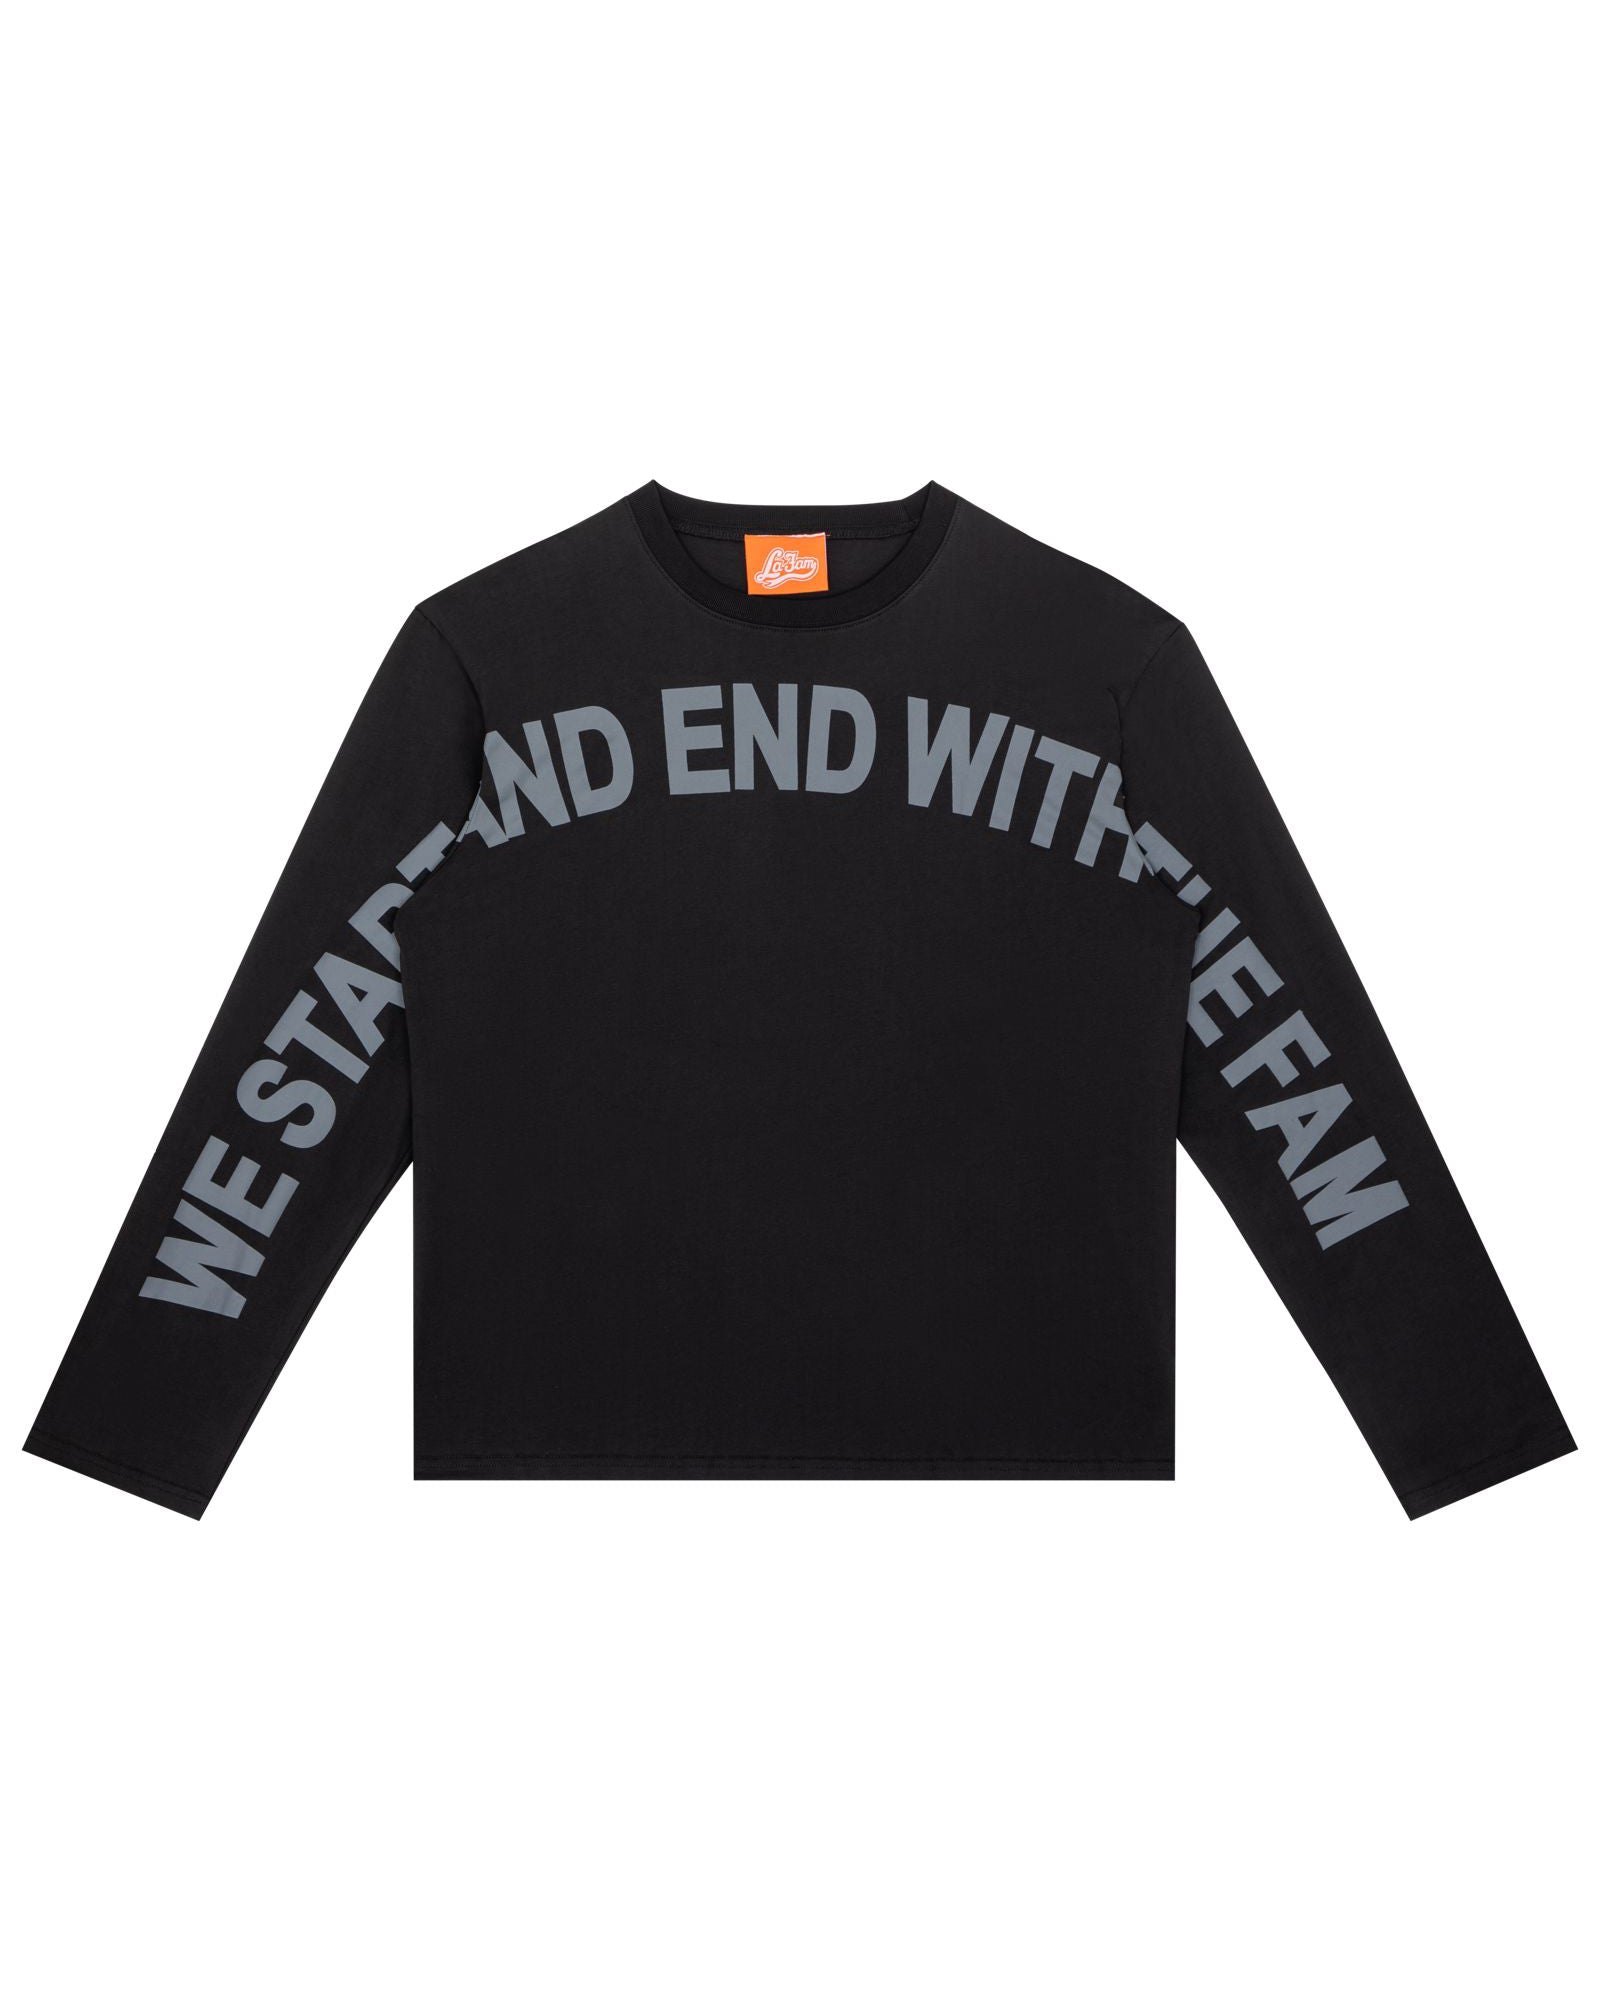 we start and end with the fam long sleeve black